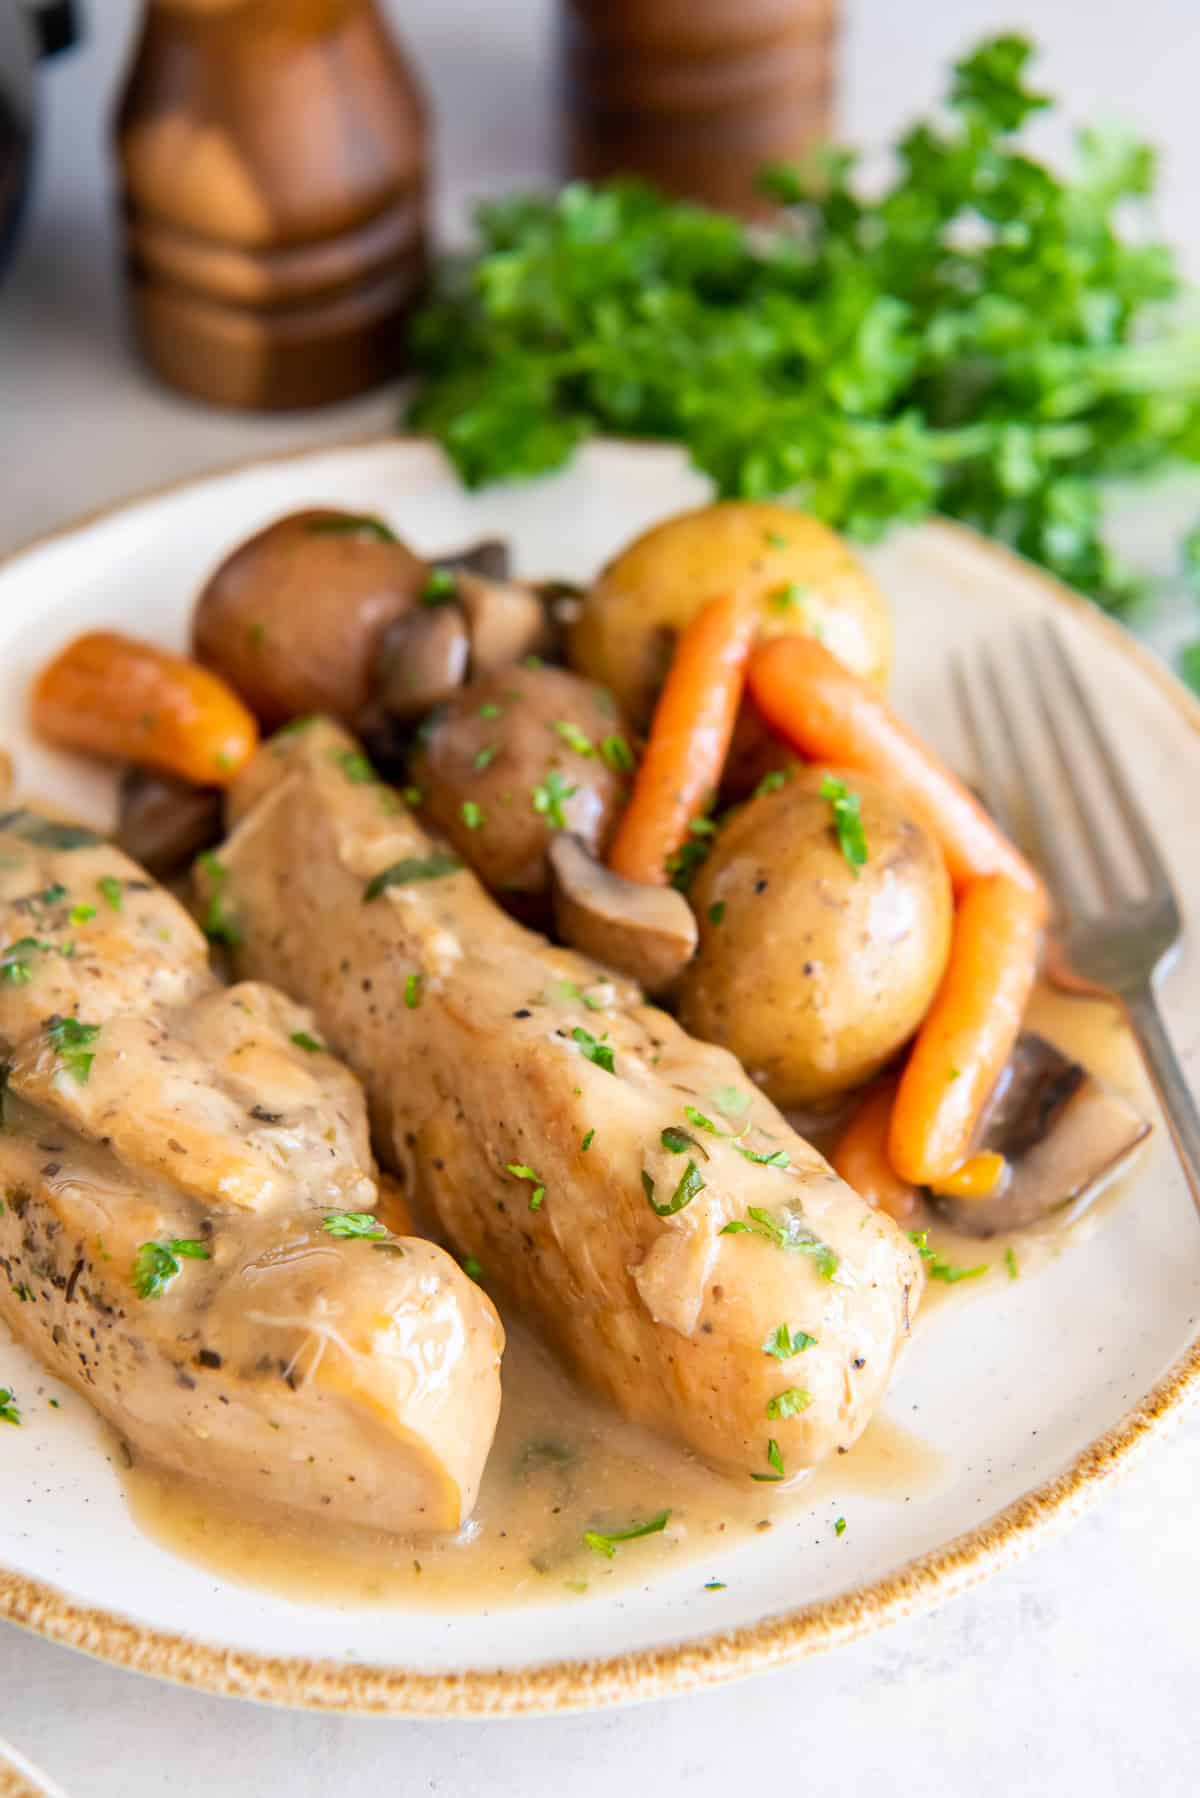 Two pieces of chicken on a plate with carrots, potatoes and gravy.